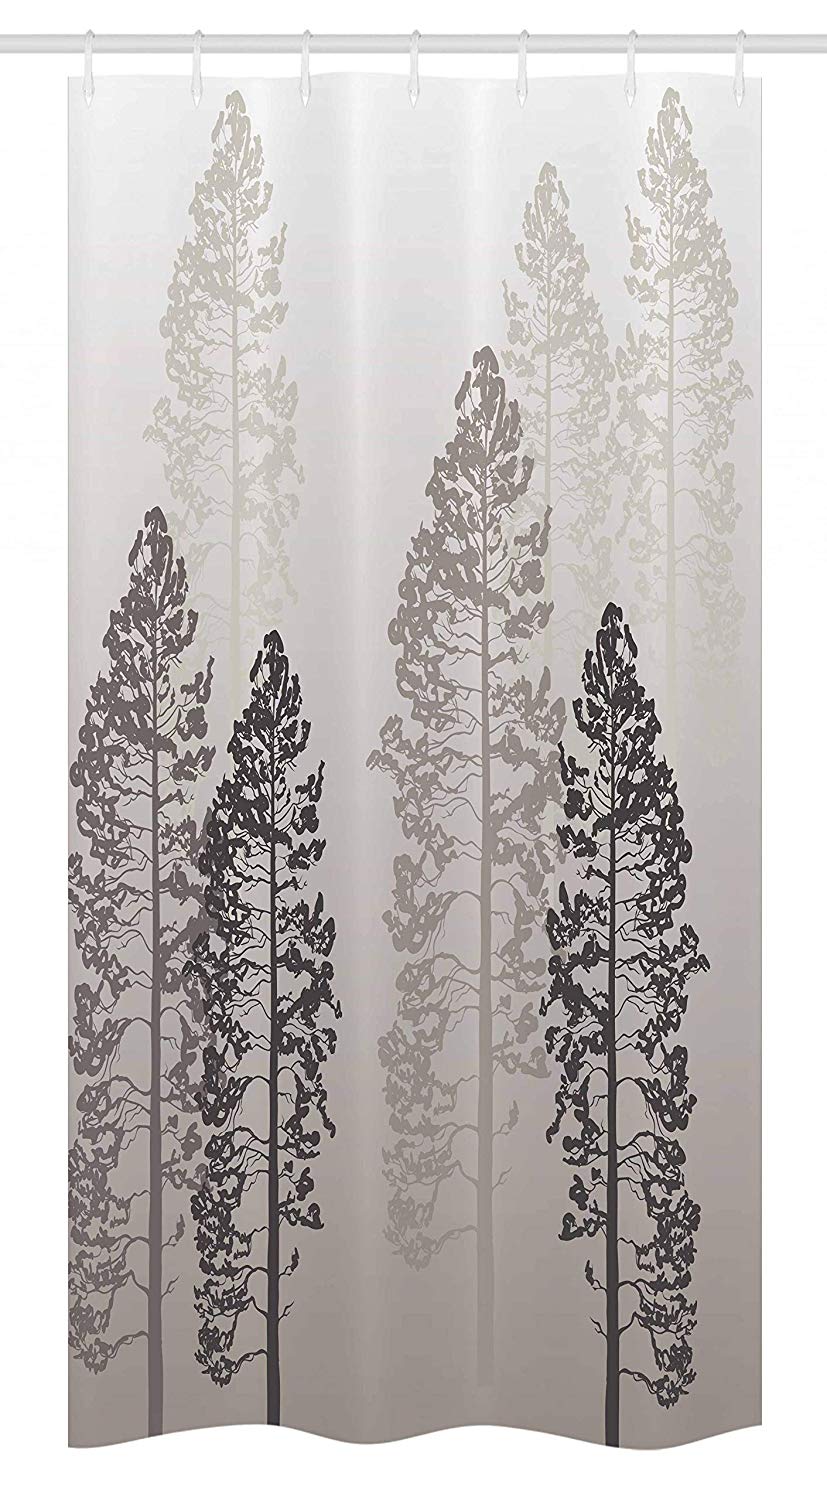 Ambesonne Country Stall Shower Curtain, Pine Trees in The Forest on Foggy Seem Ombre Backdrop Wildlife Adventure Artwork, Fabric Bathroom Decor Set with Hooks, 36